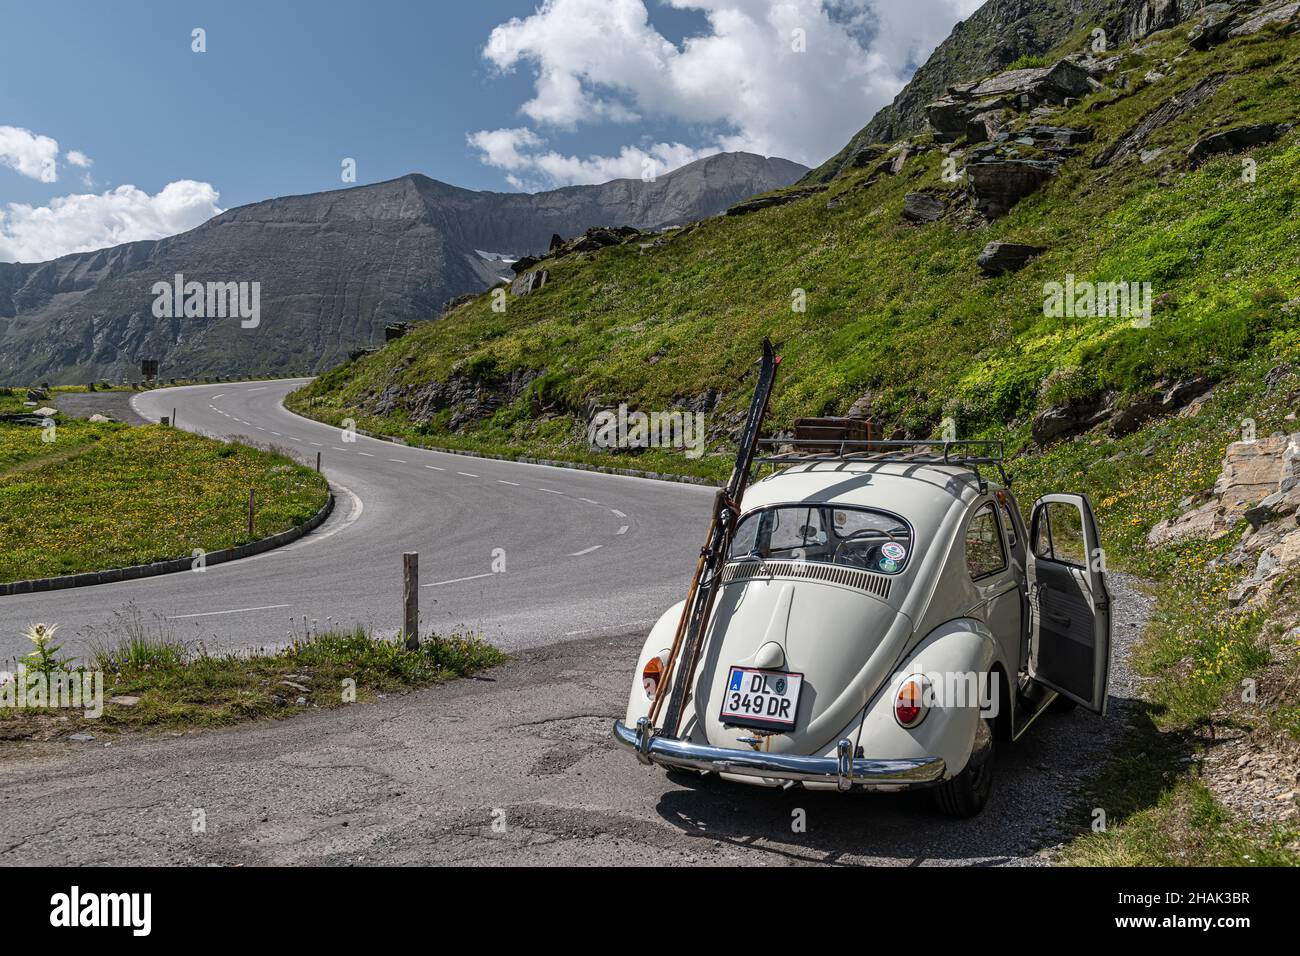 Auto Volkswagen-1300 'Beetle' at Grossglockner Hochalpenstrasse, with old suitcase and a pair of old wooden skier Stock Photo